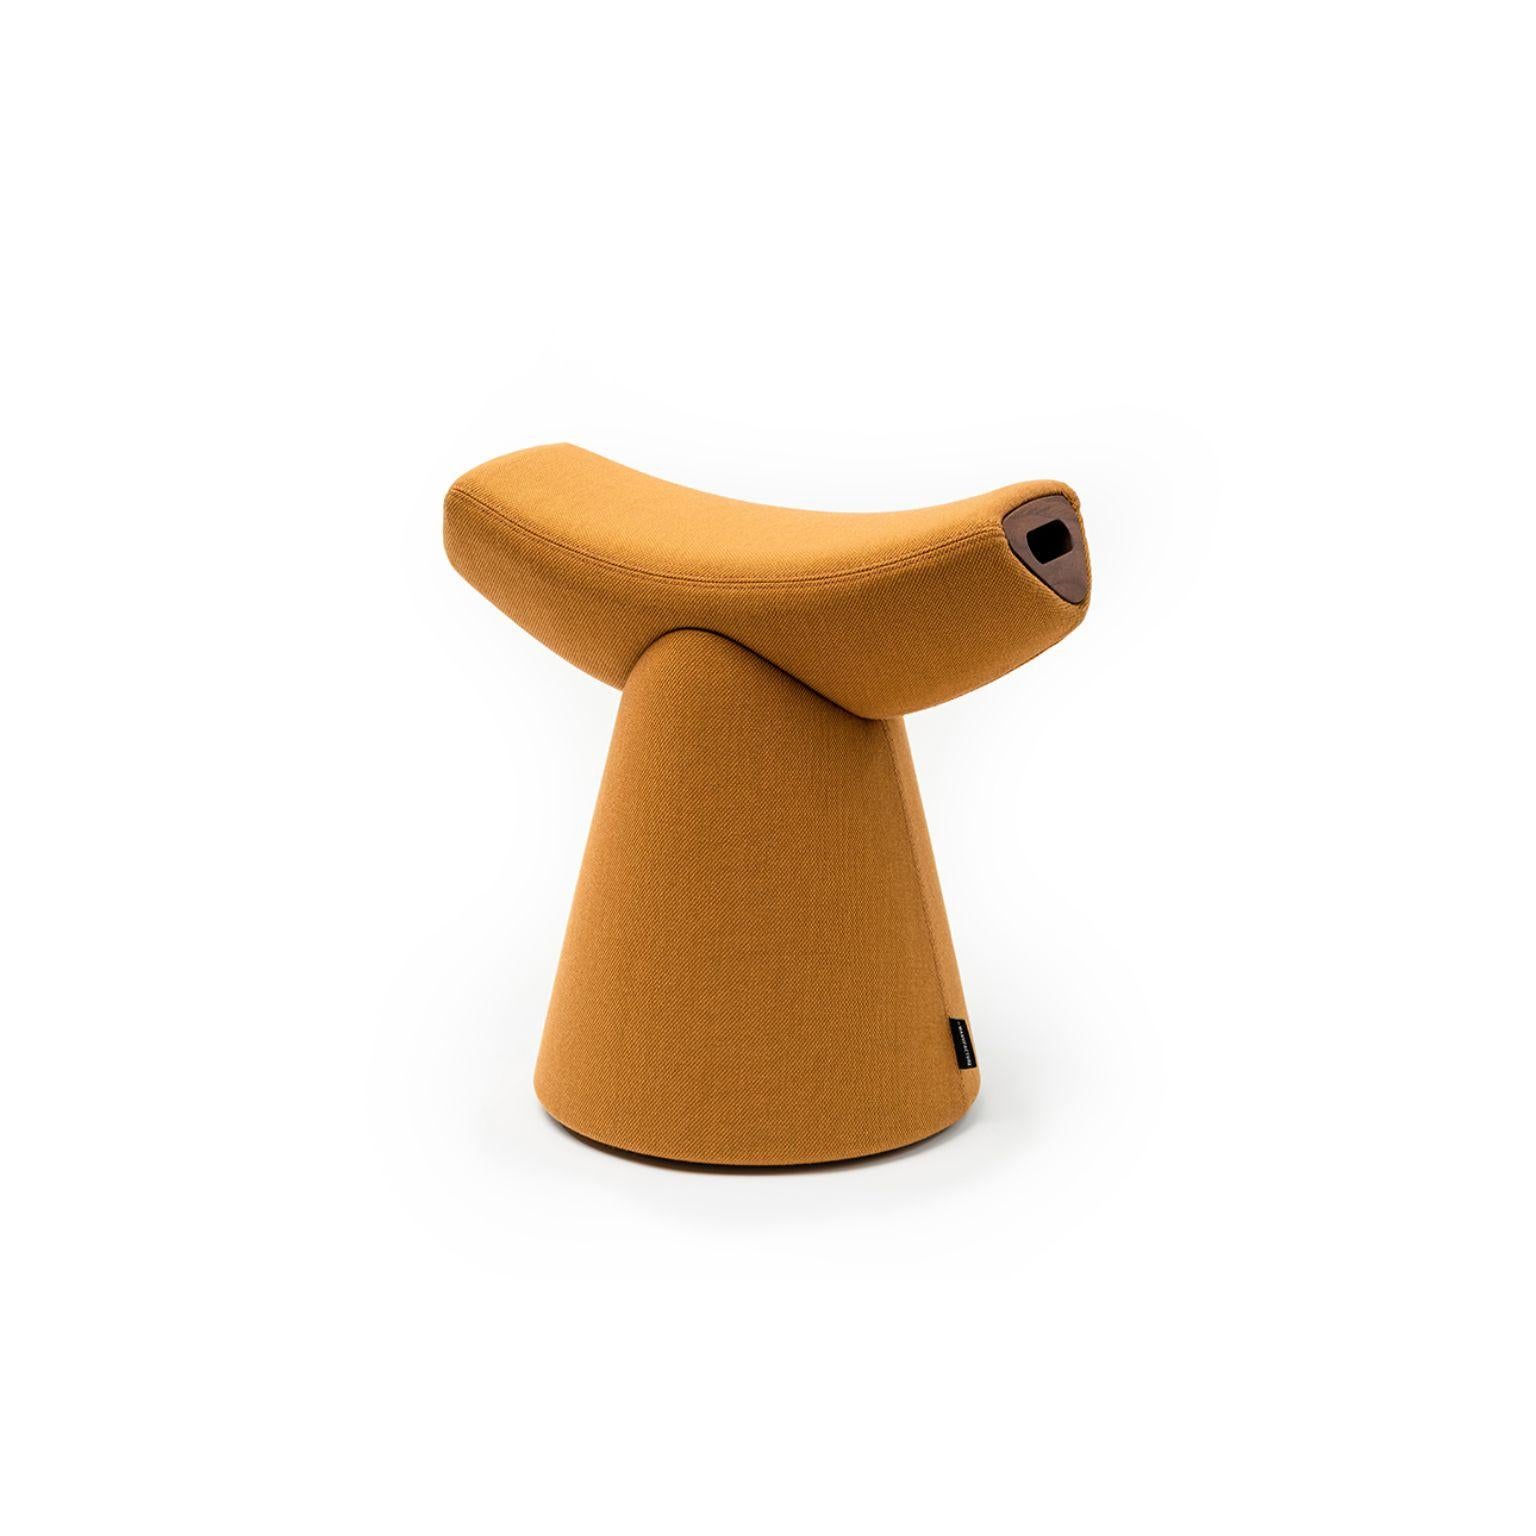 Gardian stool with handle by Patrick Norguet.
Materials: fabric (also available in leather)
 Handle: noce Canaletto solid wood.
Dimensions: W 51.1 x D 34.7 x H 49.8 cm.

For the Gardian stool by designer Patrick Norguet, the concept of seating